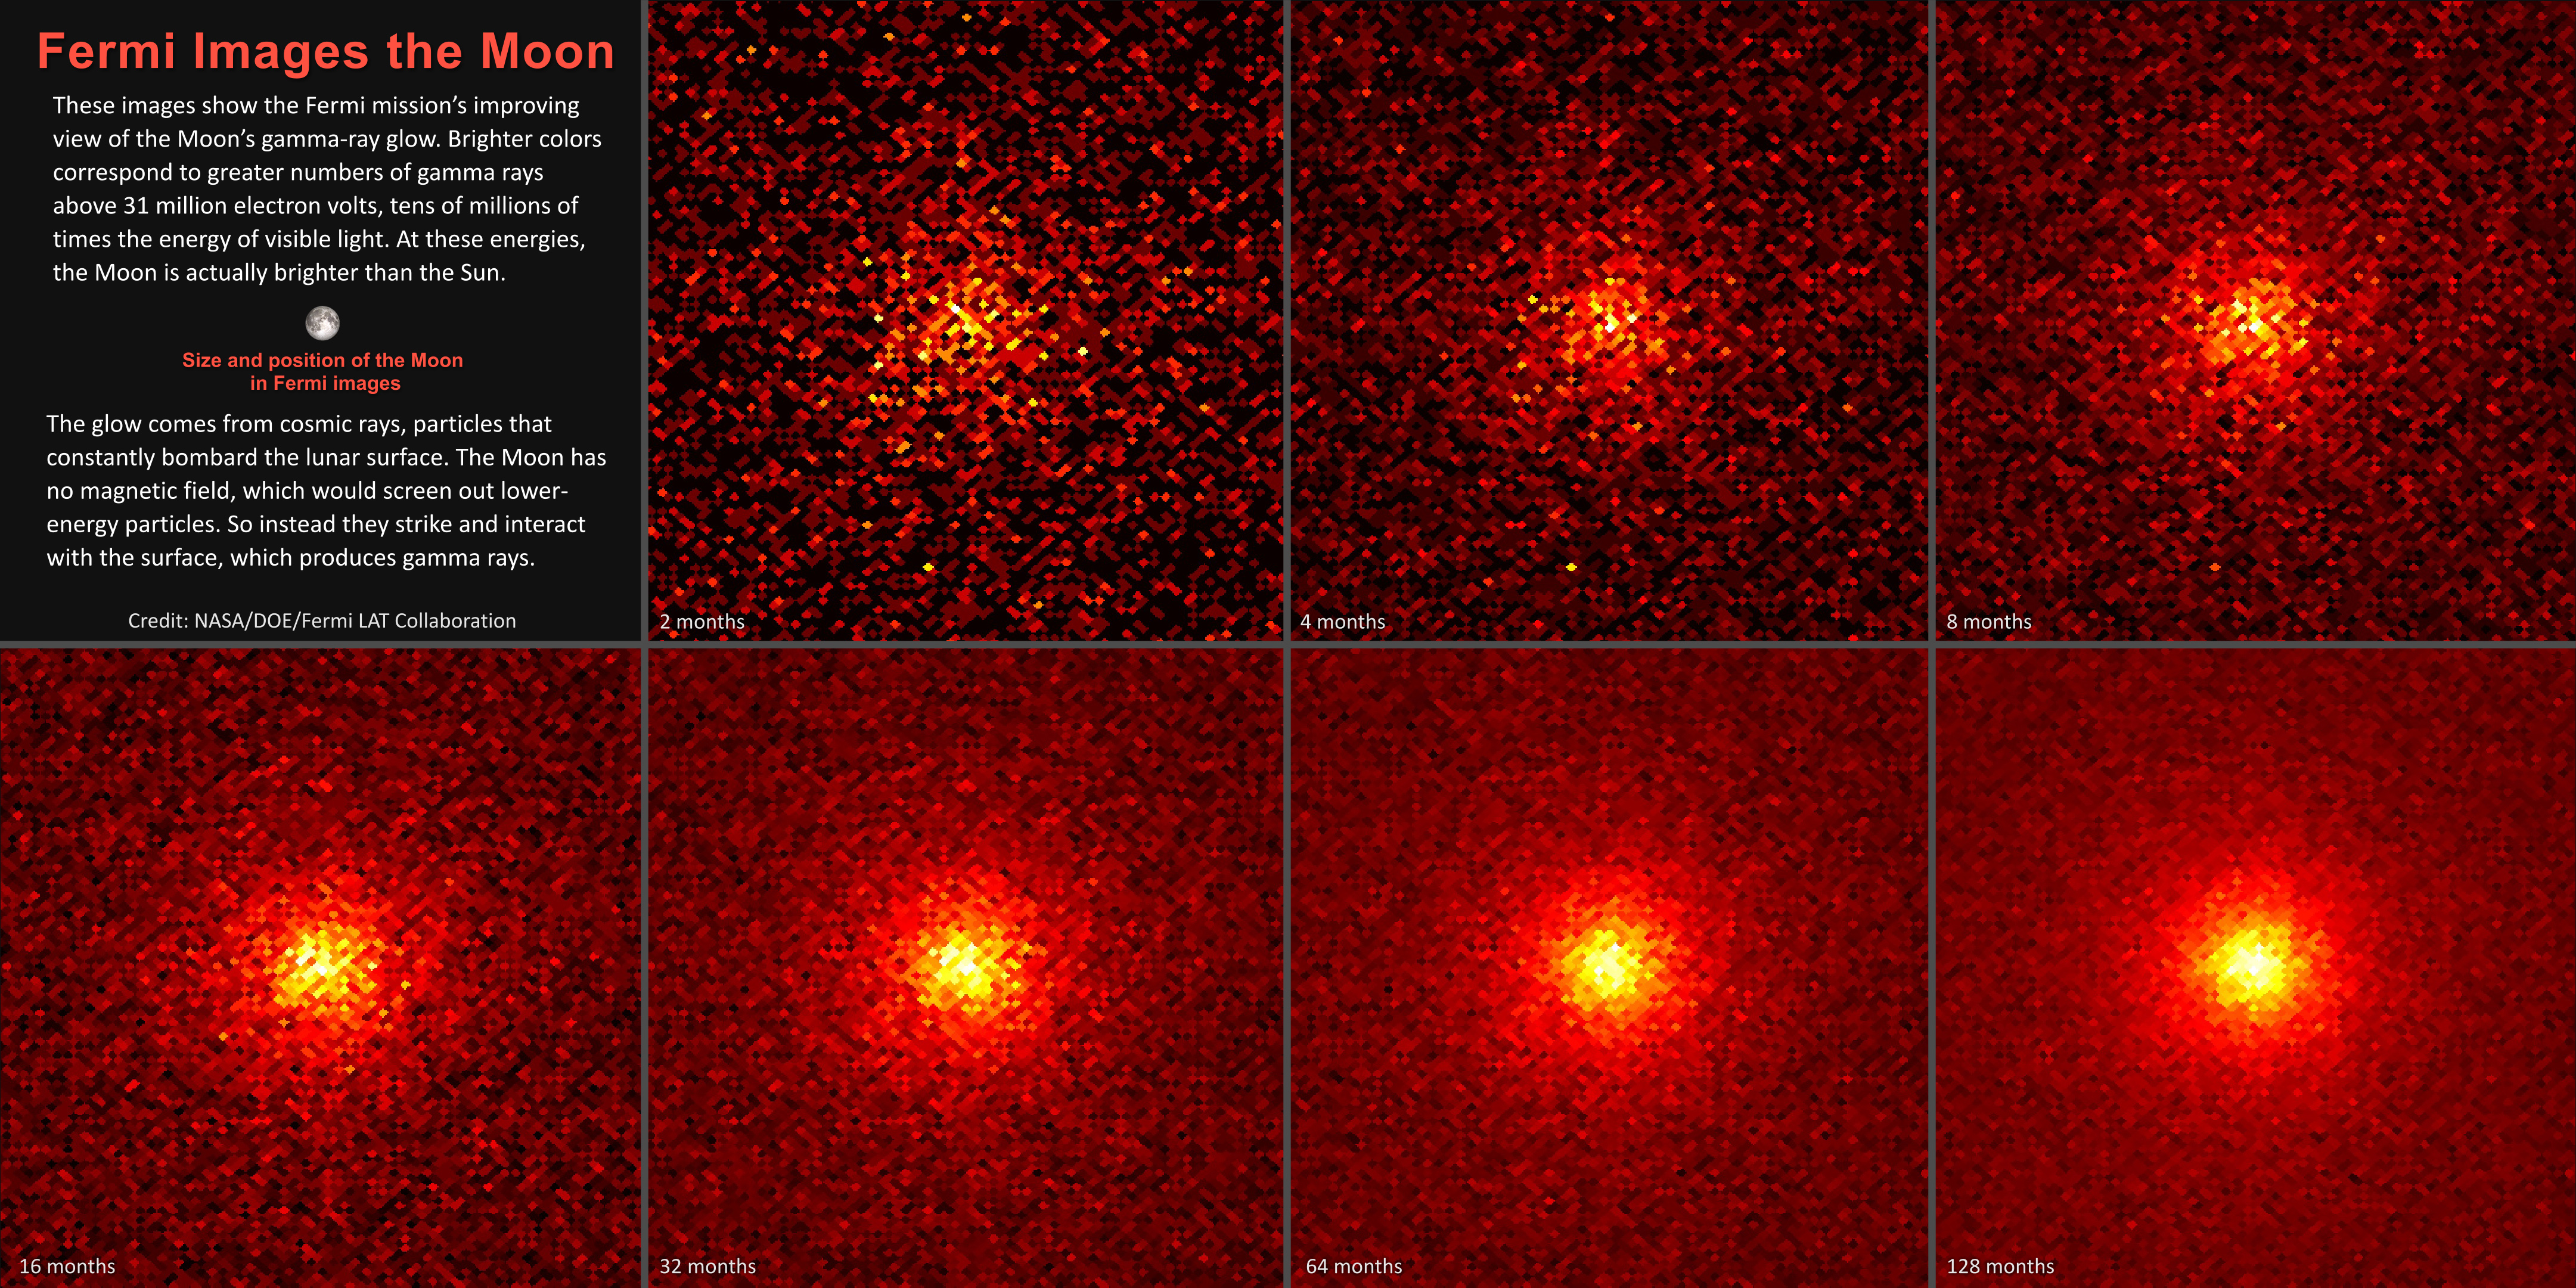 The image is broken up into a grid of eight panels. The first panel has text that reads: “Fermi Images the Moon. These images show the Fermi mission’s improving view of the Moon’s gamma-ray glow. Brighter colors correspond to greater numbers of gamma rays above 31 million electron volts, tens of millions of times the energy of visible light. At these energies, the Moon is actually brighter than the Sun. The glow comes from cosmic rays, particles that constantly bombard the lunar surface. The Moon has no magnetic field, which would screen out lower-energy particles. So instead they strike and interact with the surface, which produces gamma rays. Credit: NASA/DOE/Fermi LAT Collaboration.” The first panel also includes a visible-light image of the Moon, which is small in the center of the panel. The subsequent panels are labeled 2 months, 4 months, 8 months, 16 months, 32 months, 64 months, and 128 months. Each shows a bright yellow region in the middle surrounded by a haze of orange that fades into light red at the edges of the image. The first image is extremely pixelated, with the the central circle coming into more focus with each subsequent image.